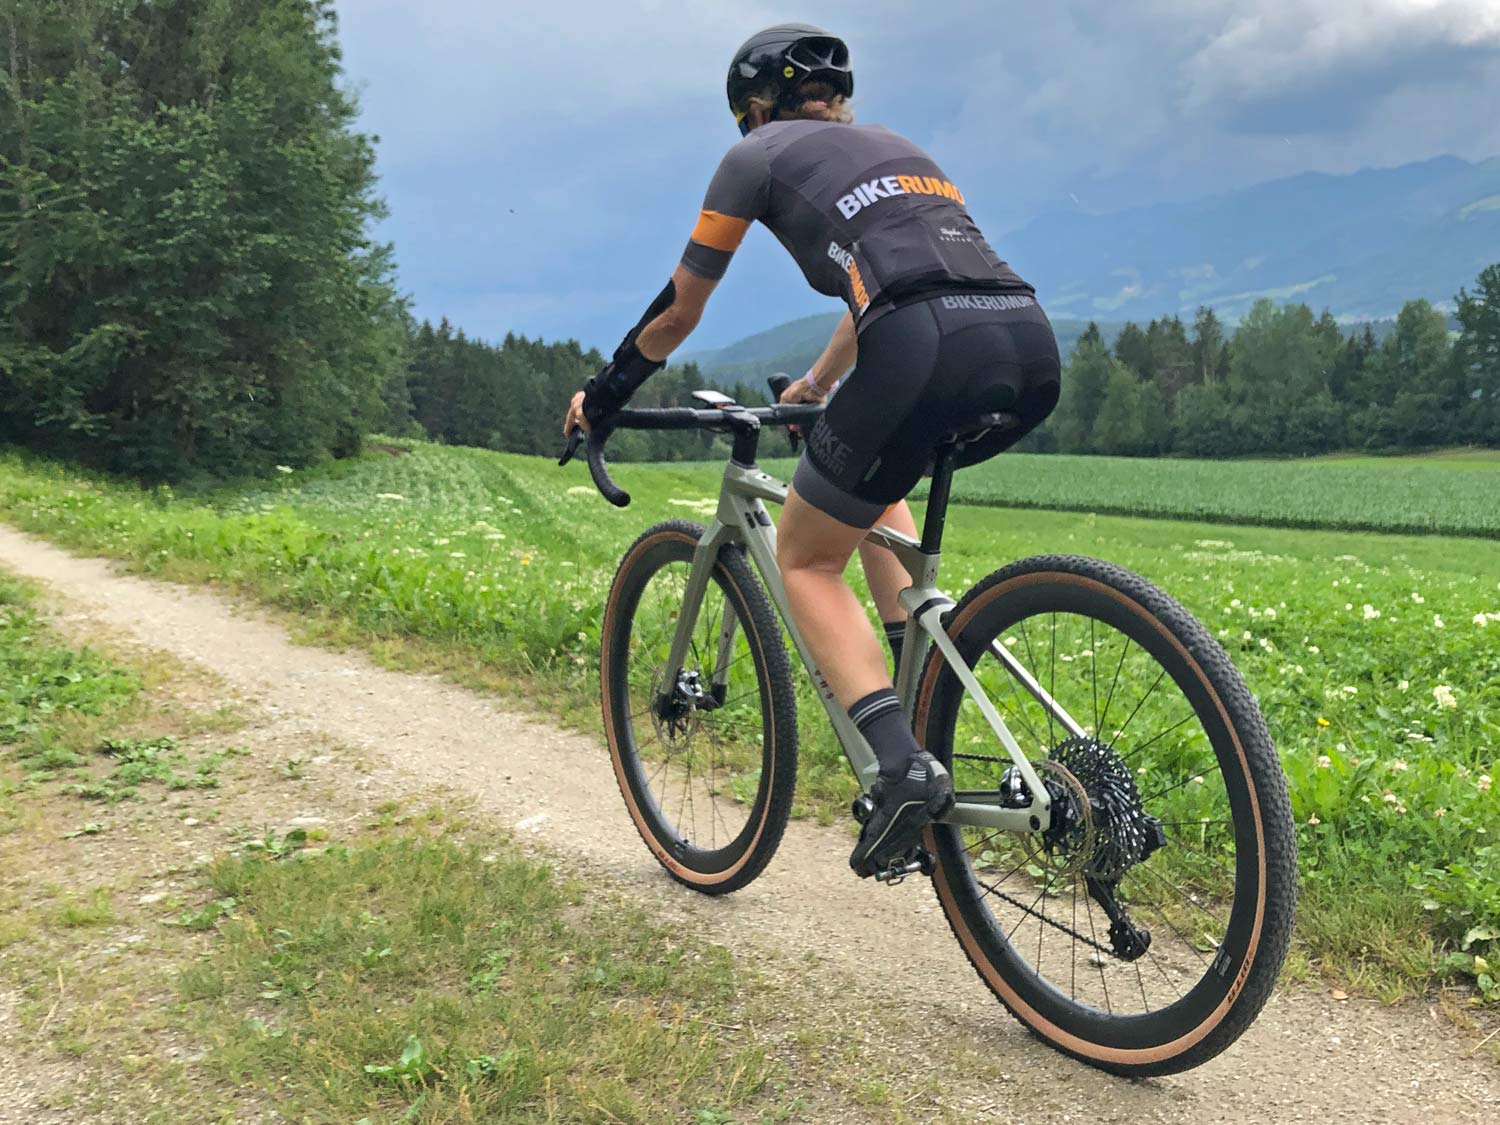 First Rides Review: Taking on gravel and (far) beyond with the BMC URS